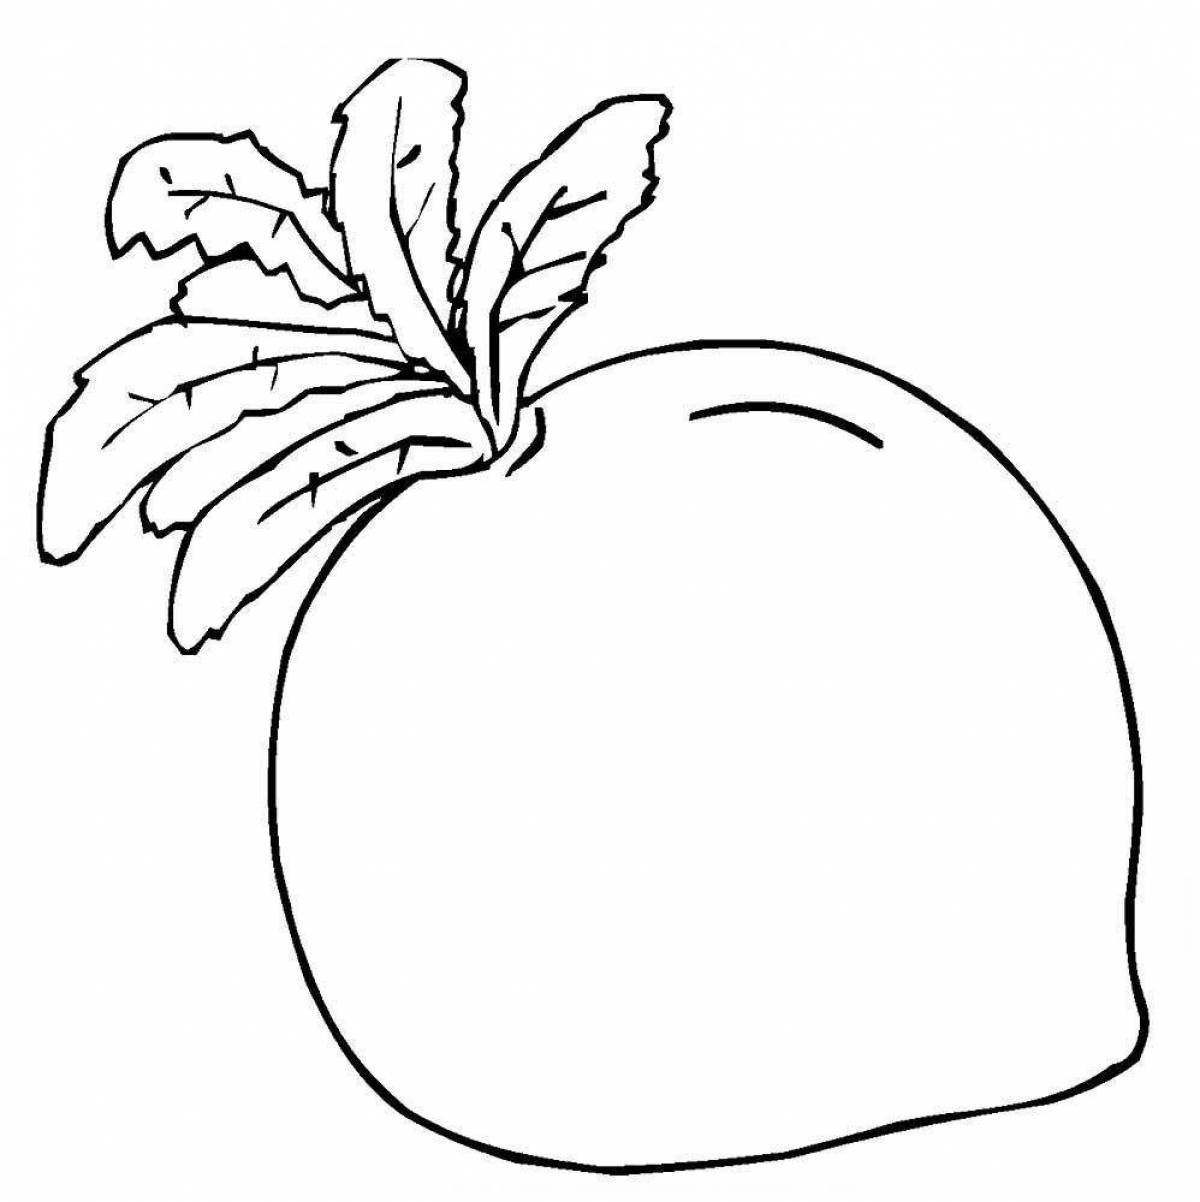 Playful turnip coloring page